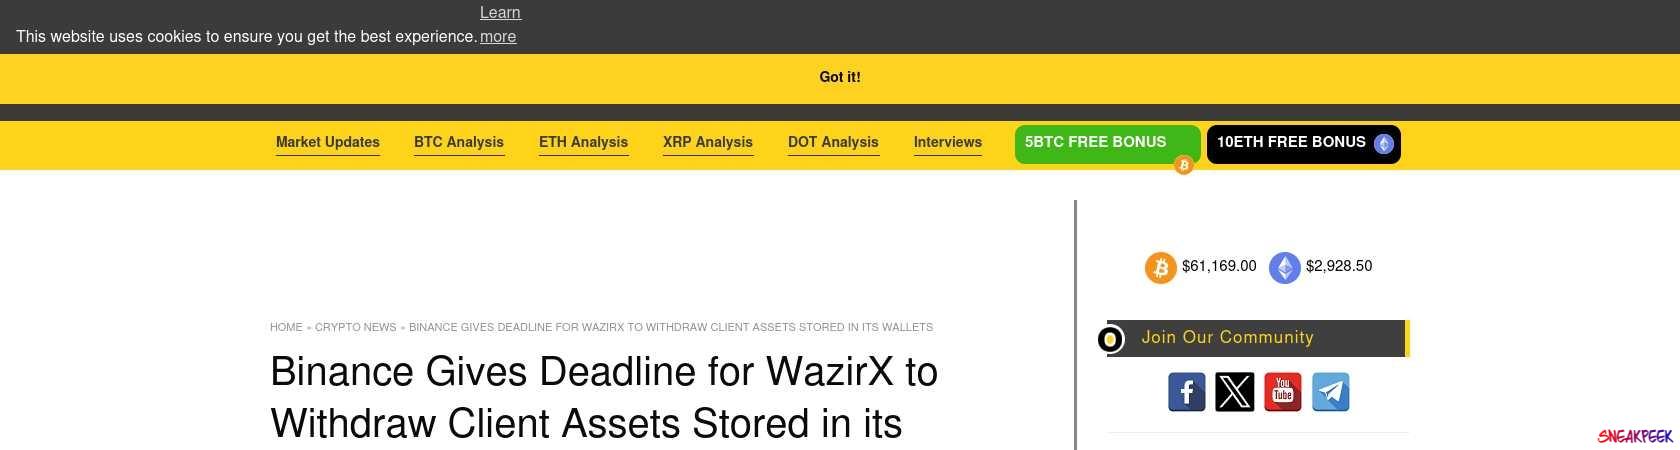 Read the full Article:  ⭲ Binance Gives Deadline for WazirX to Withdraw Client Assets Stored in its Wallets